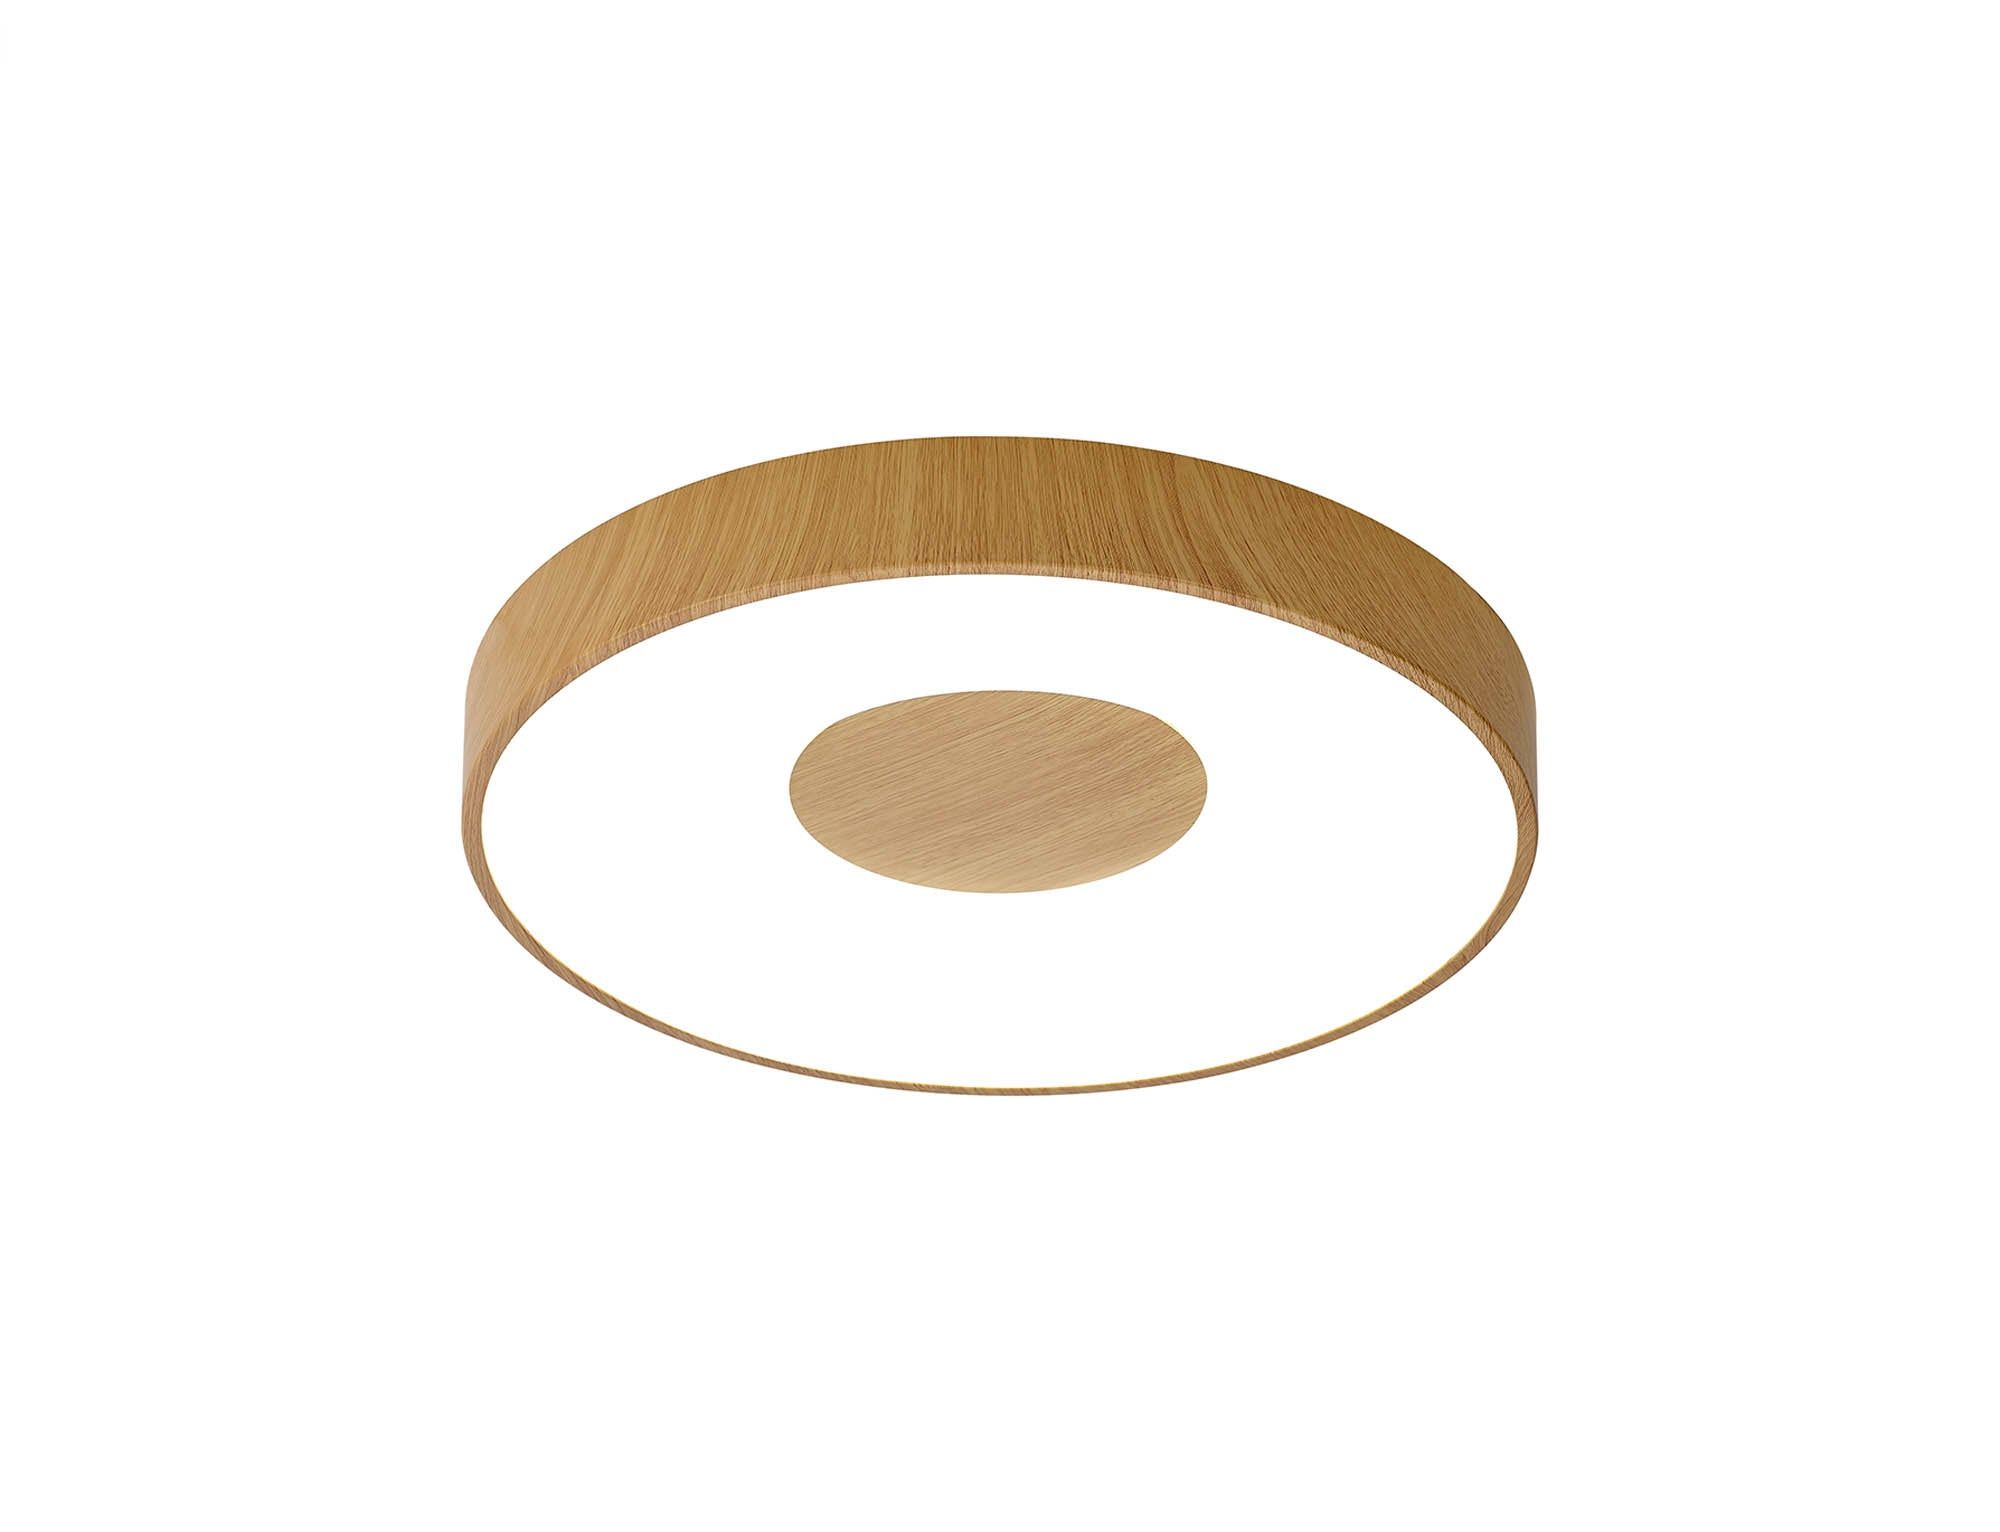 Coin Round Ceiling 80W LED With Remote Control 2700K-5000K, 3900lm, Wood Effect, 3yrs Warranty